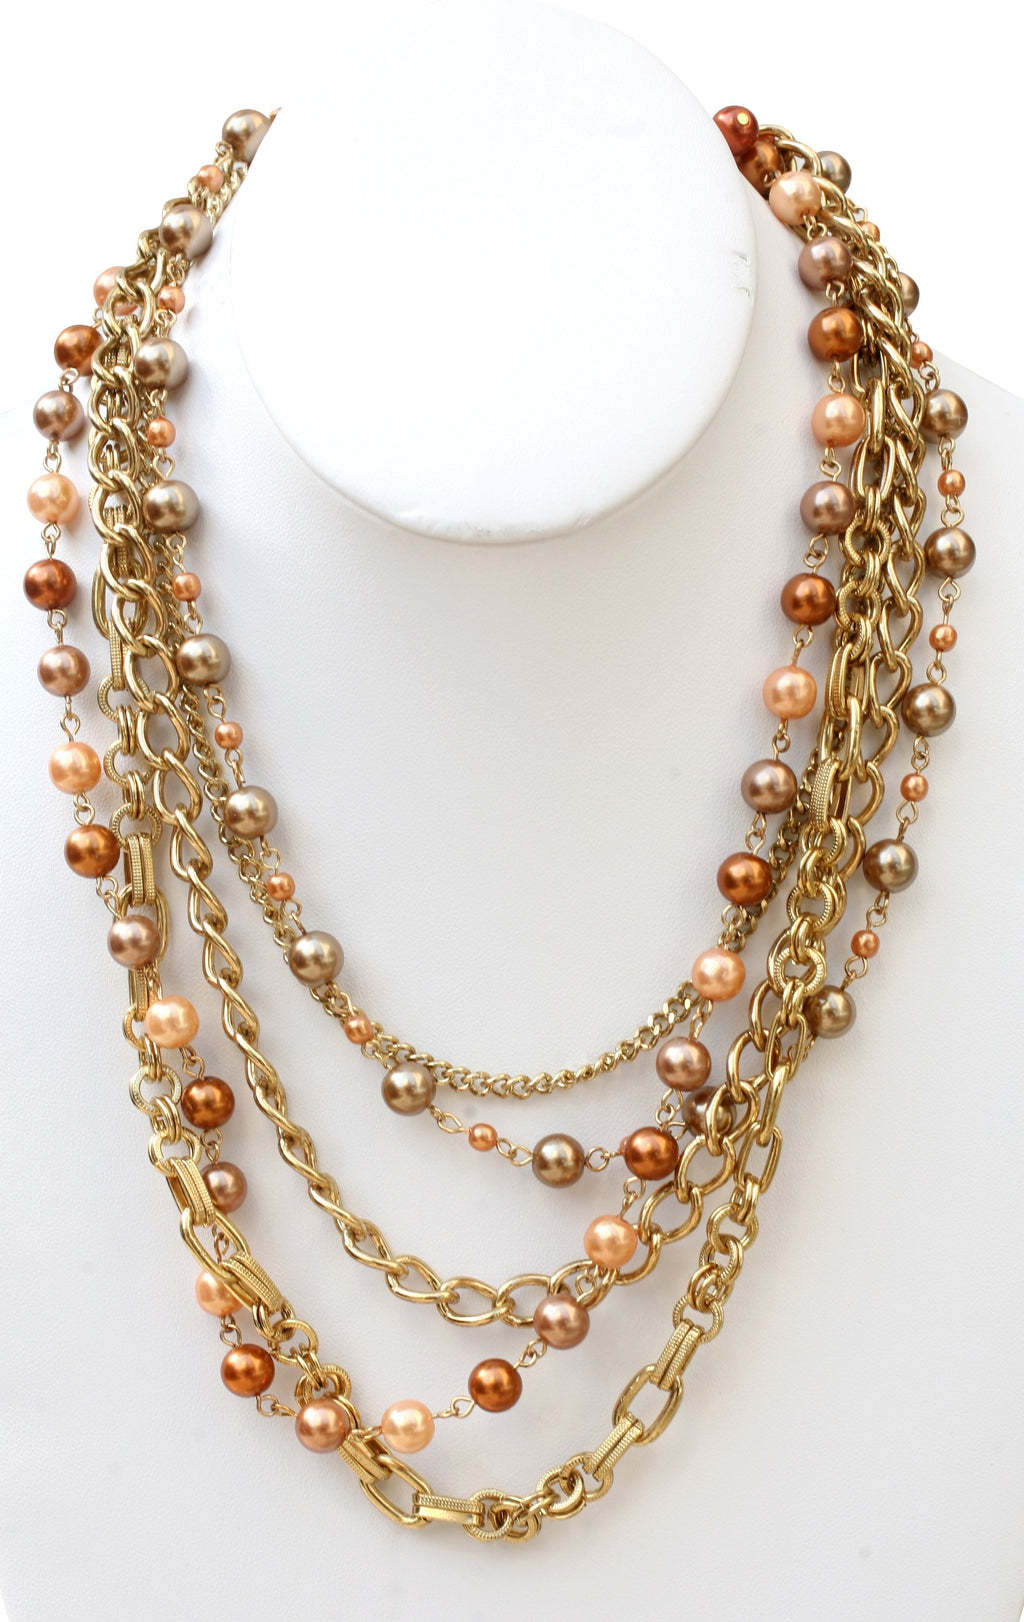 Multi strand chain link necklace with round shape